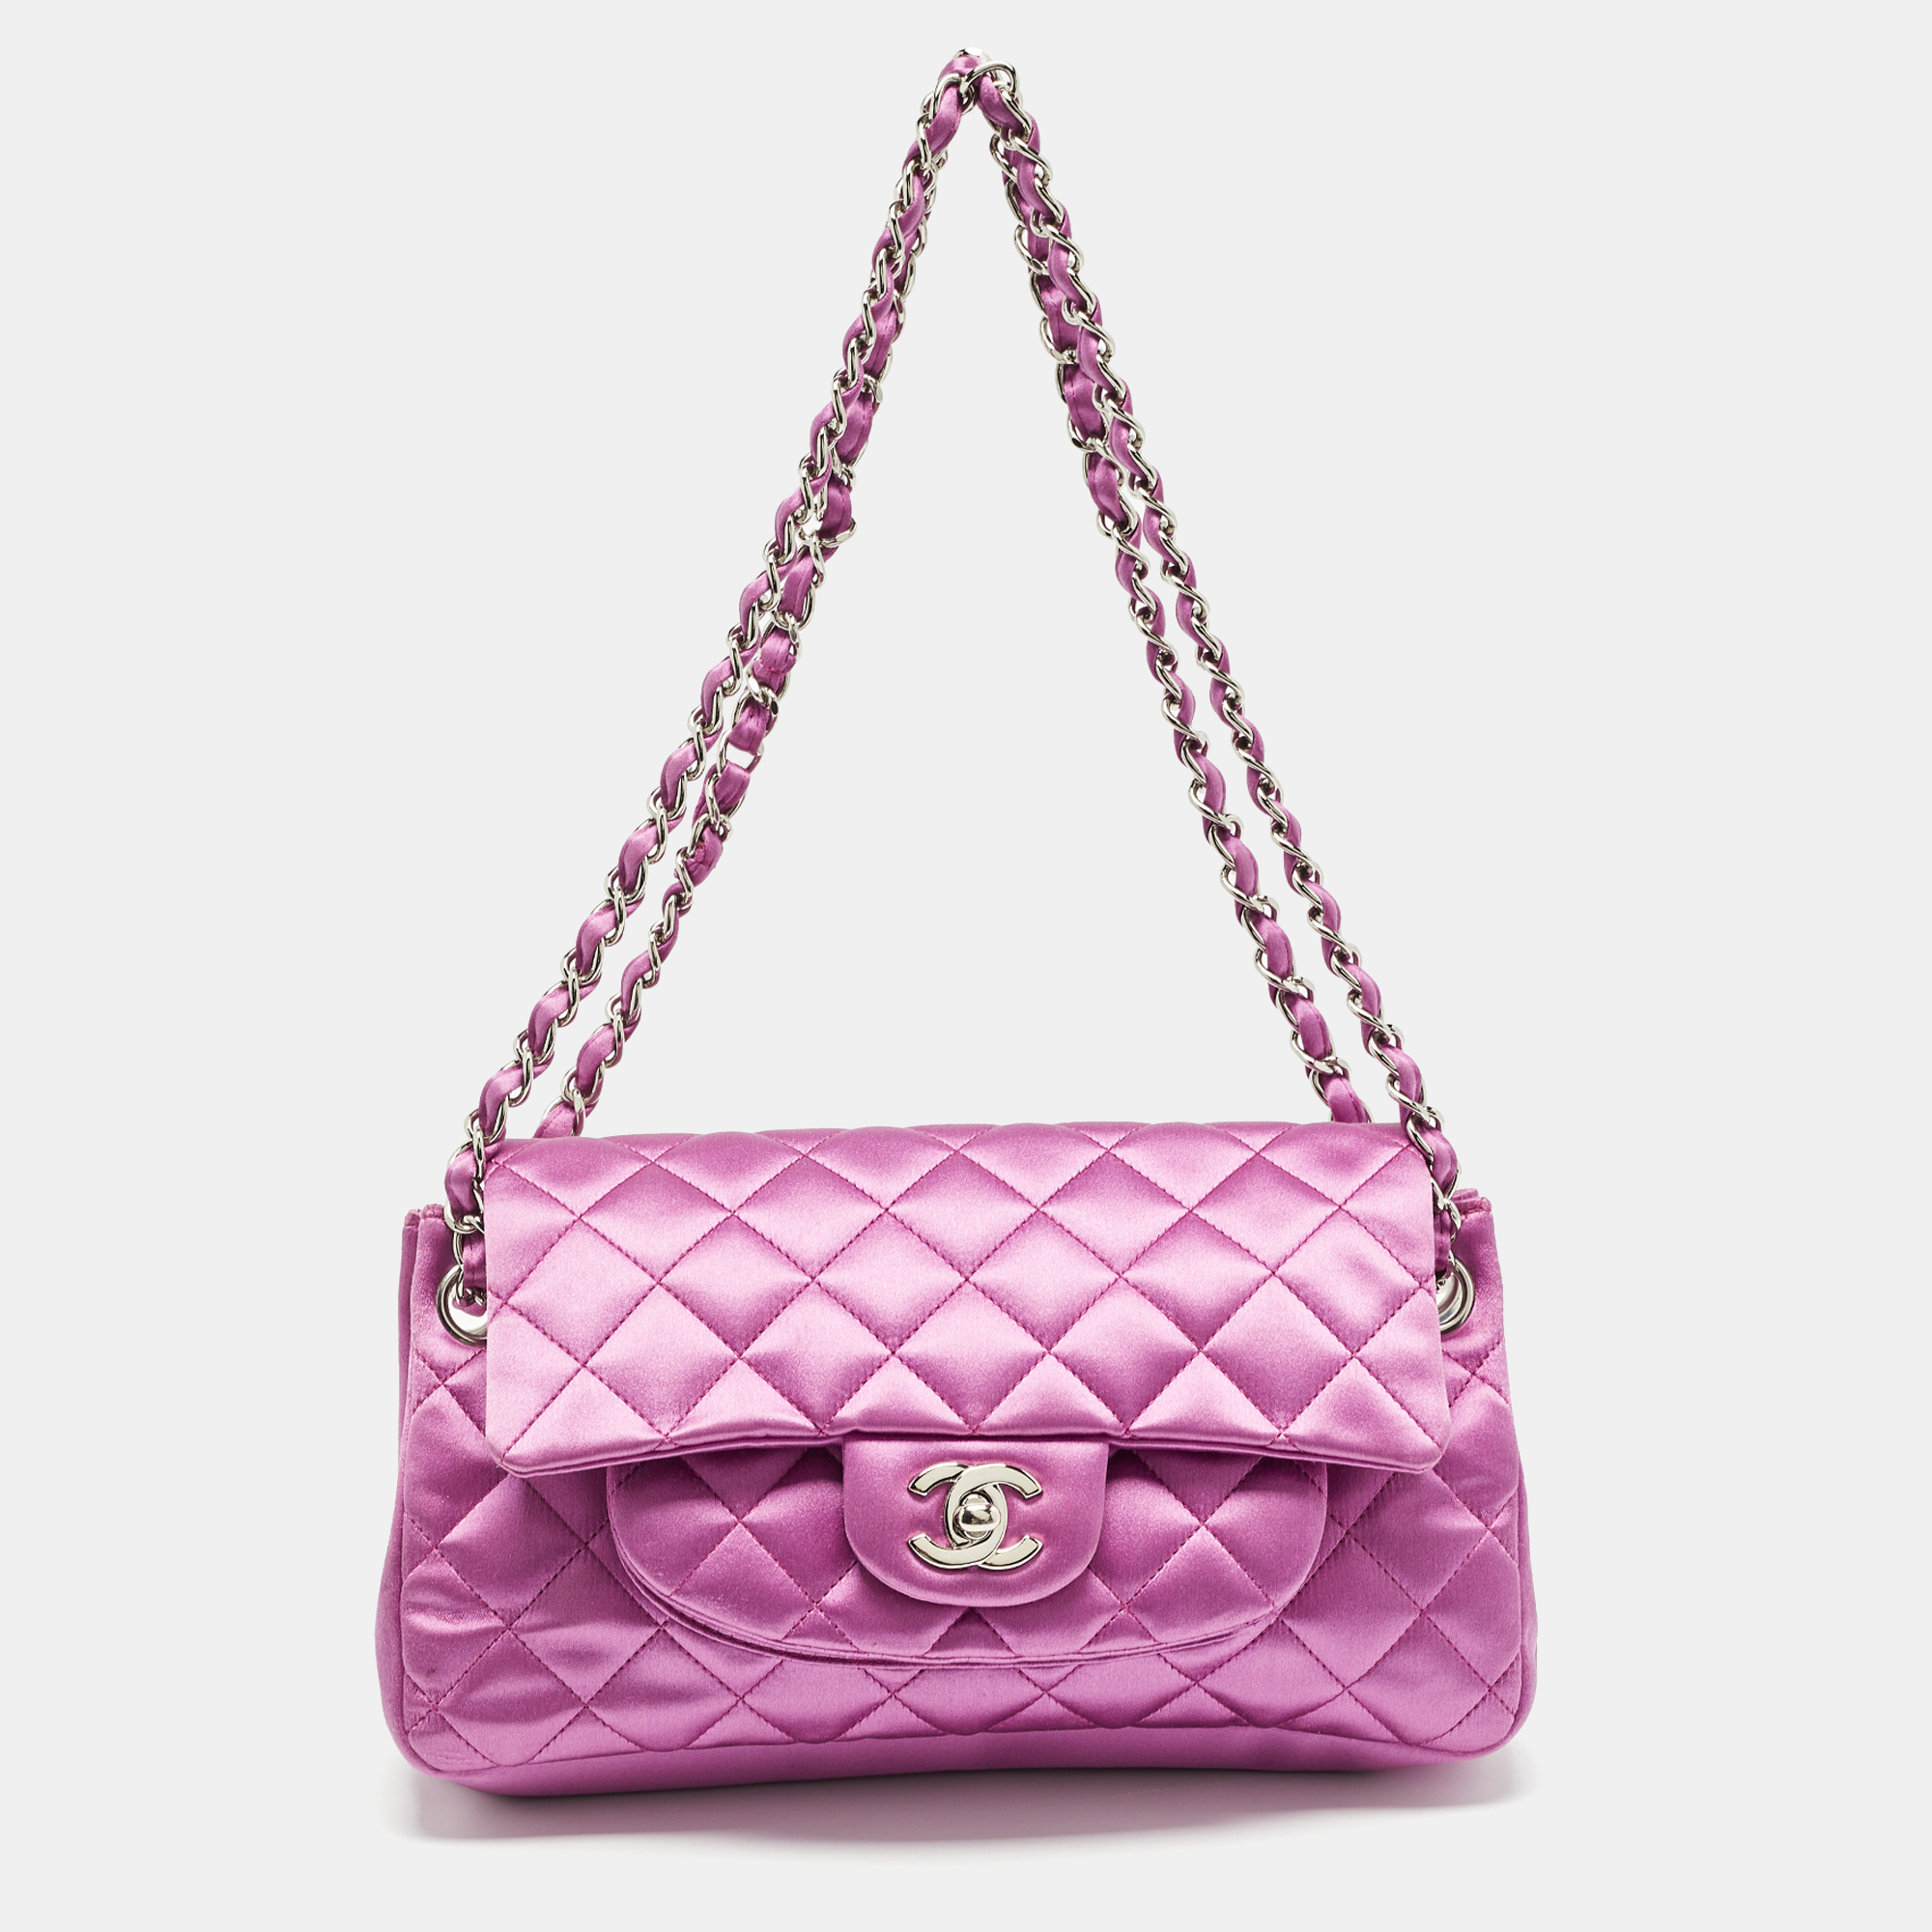 Chanel purple quilted satin classic accordion shoulder bag